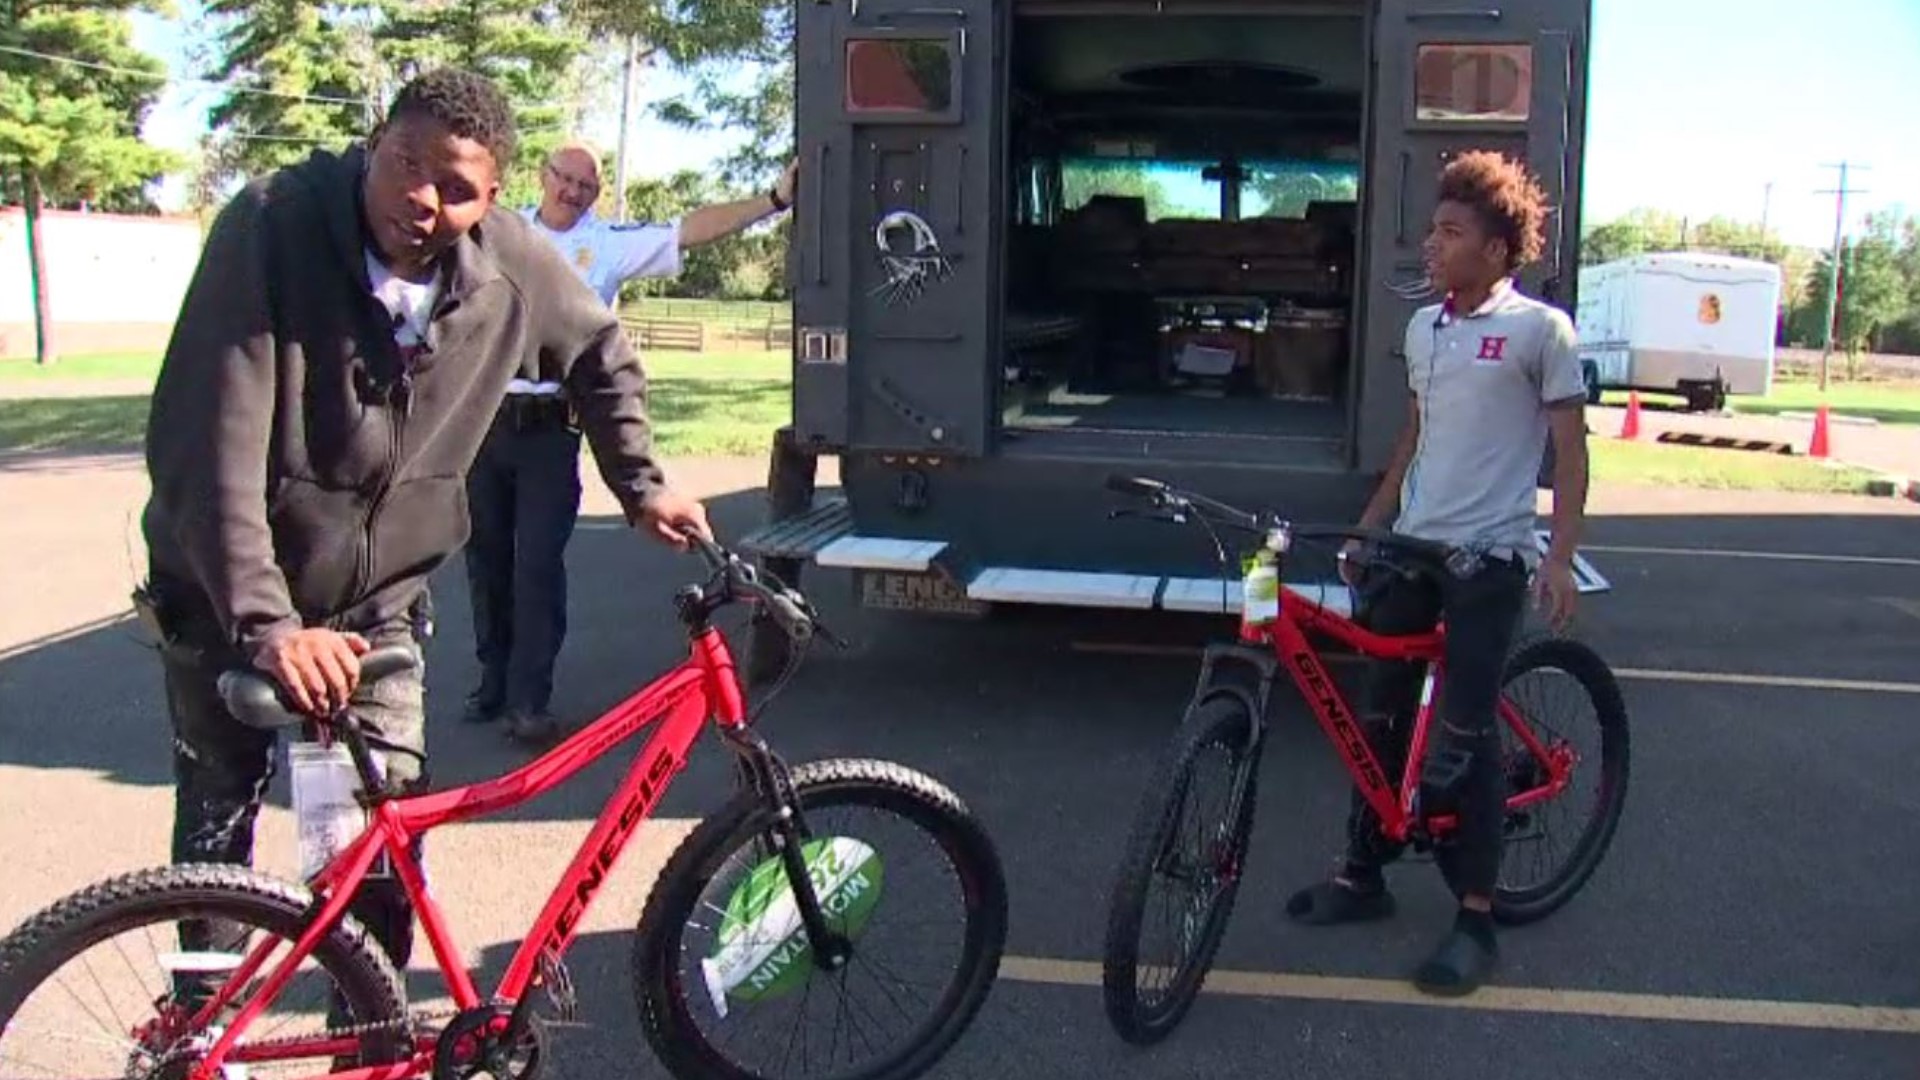 Columbus police and the Starfish Assignment surprised the boys with a VIP behind-the-scenes tour of the division's facilities and brand new bikes.